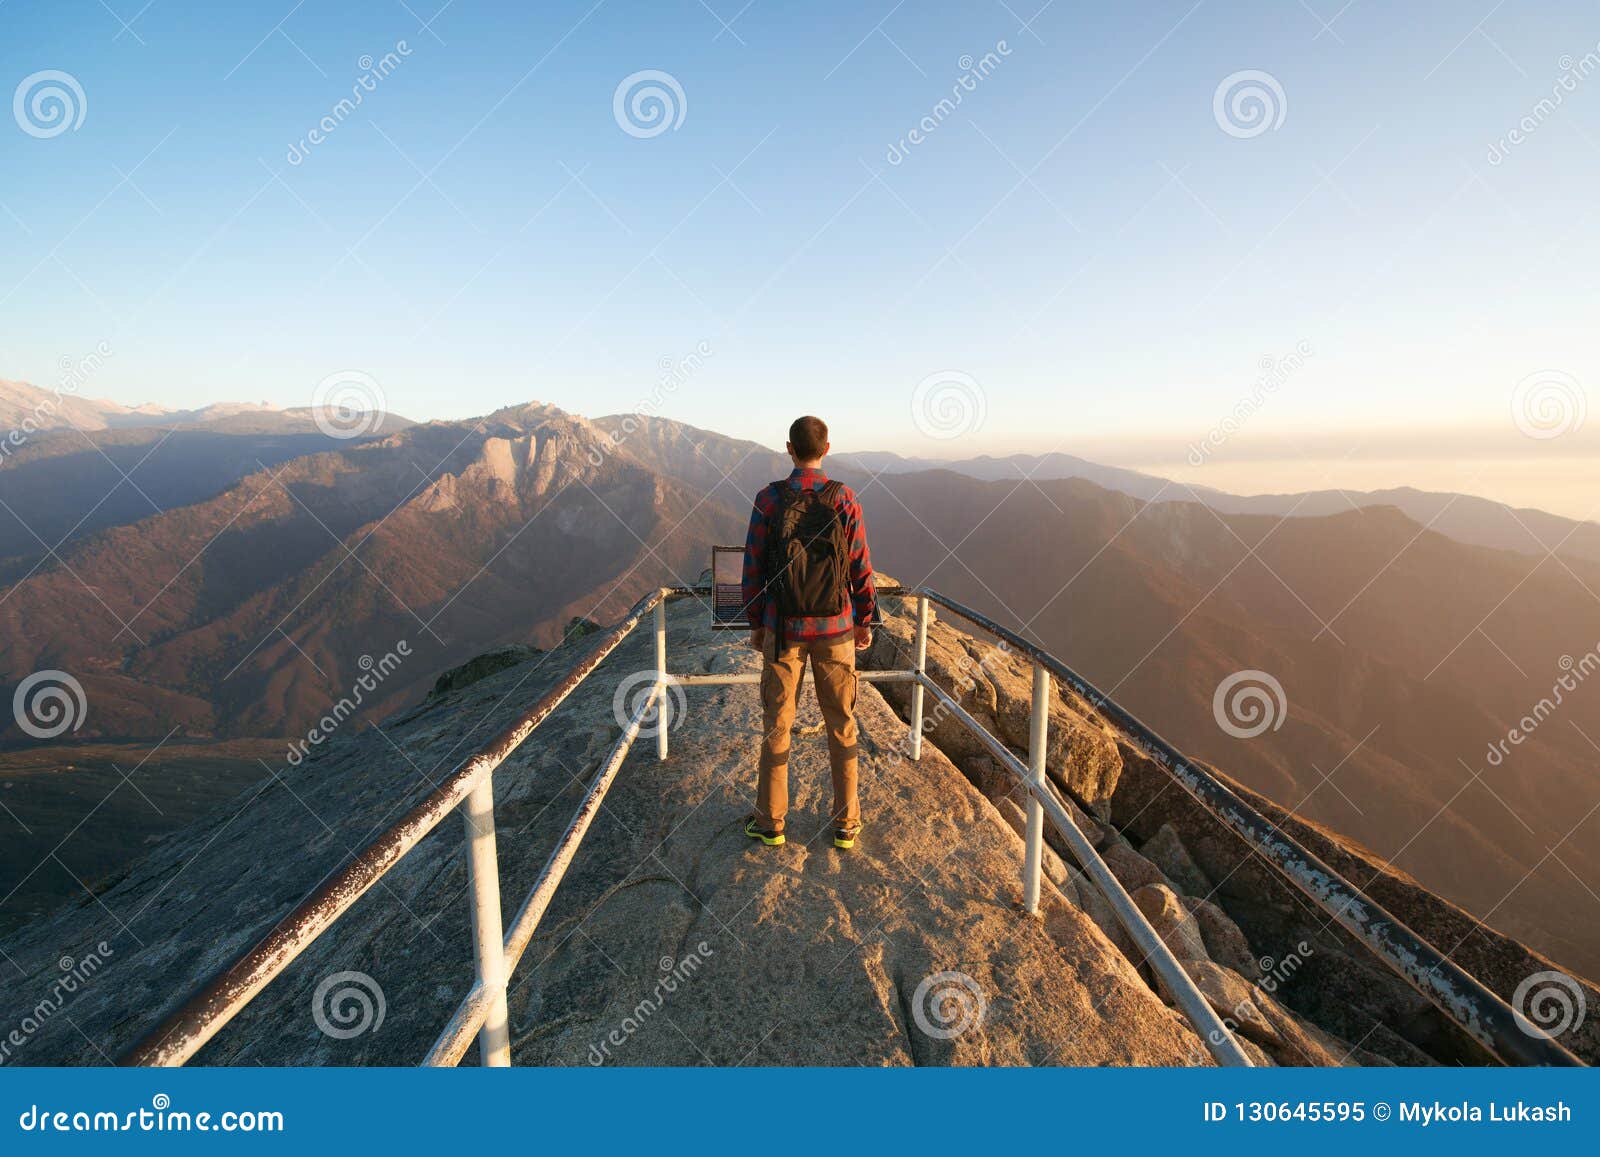 travel in sequoia national park, man hiker with backpack enjoying view moro rock, california, usa